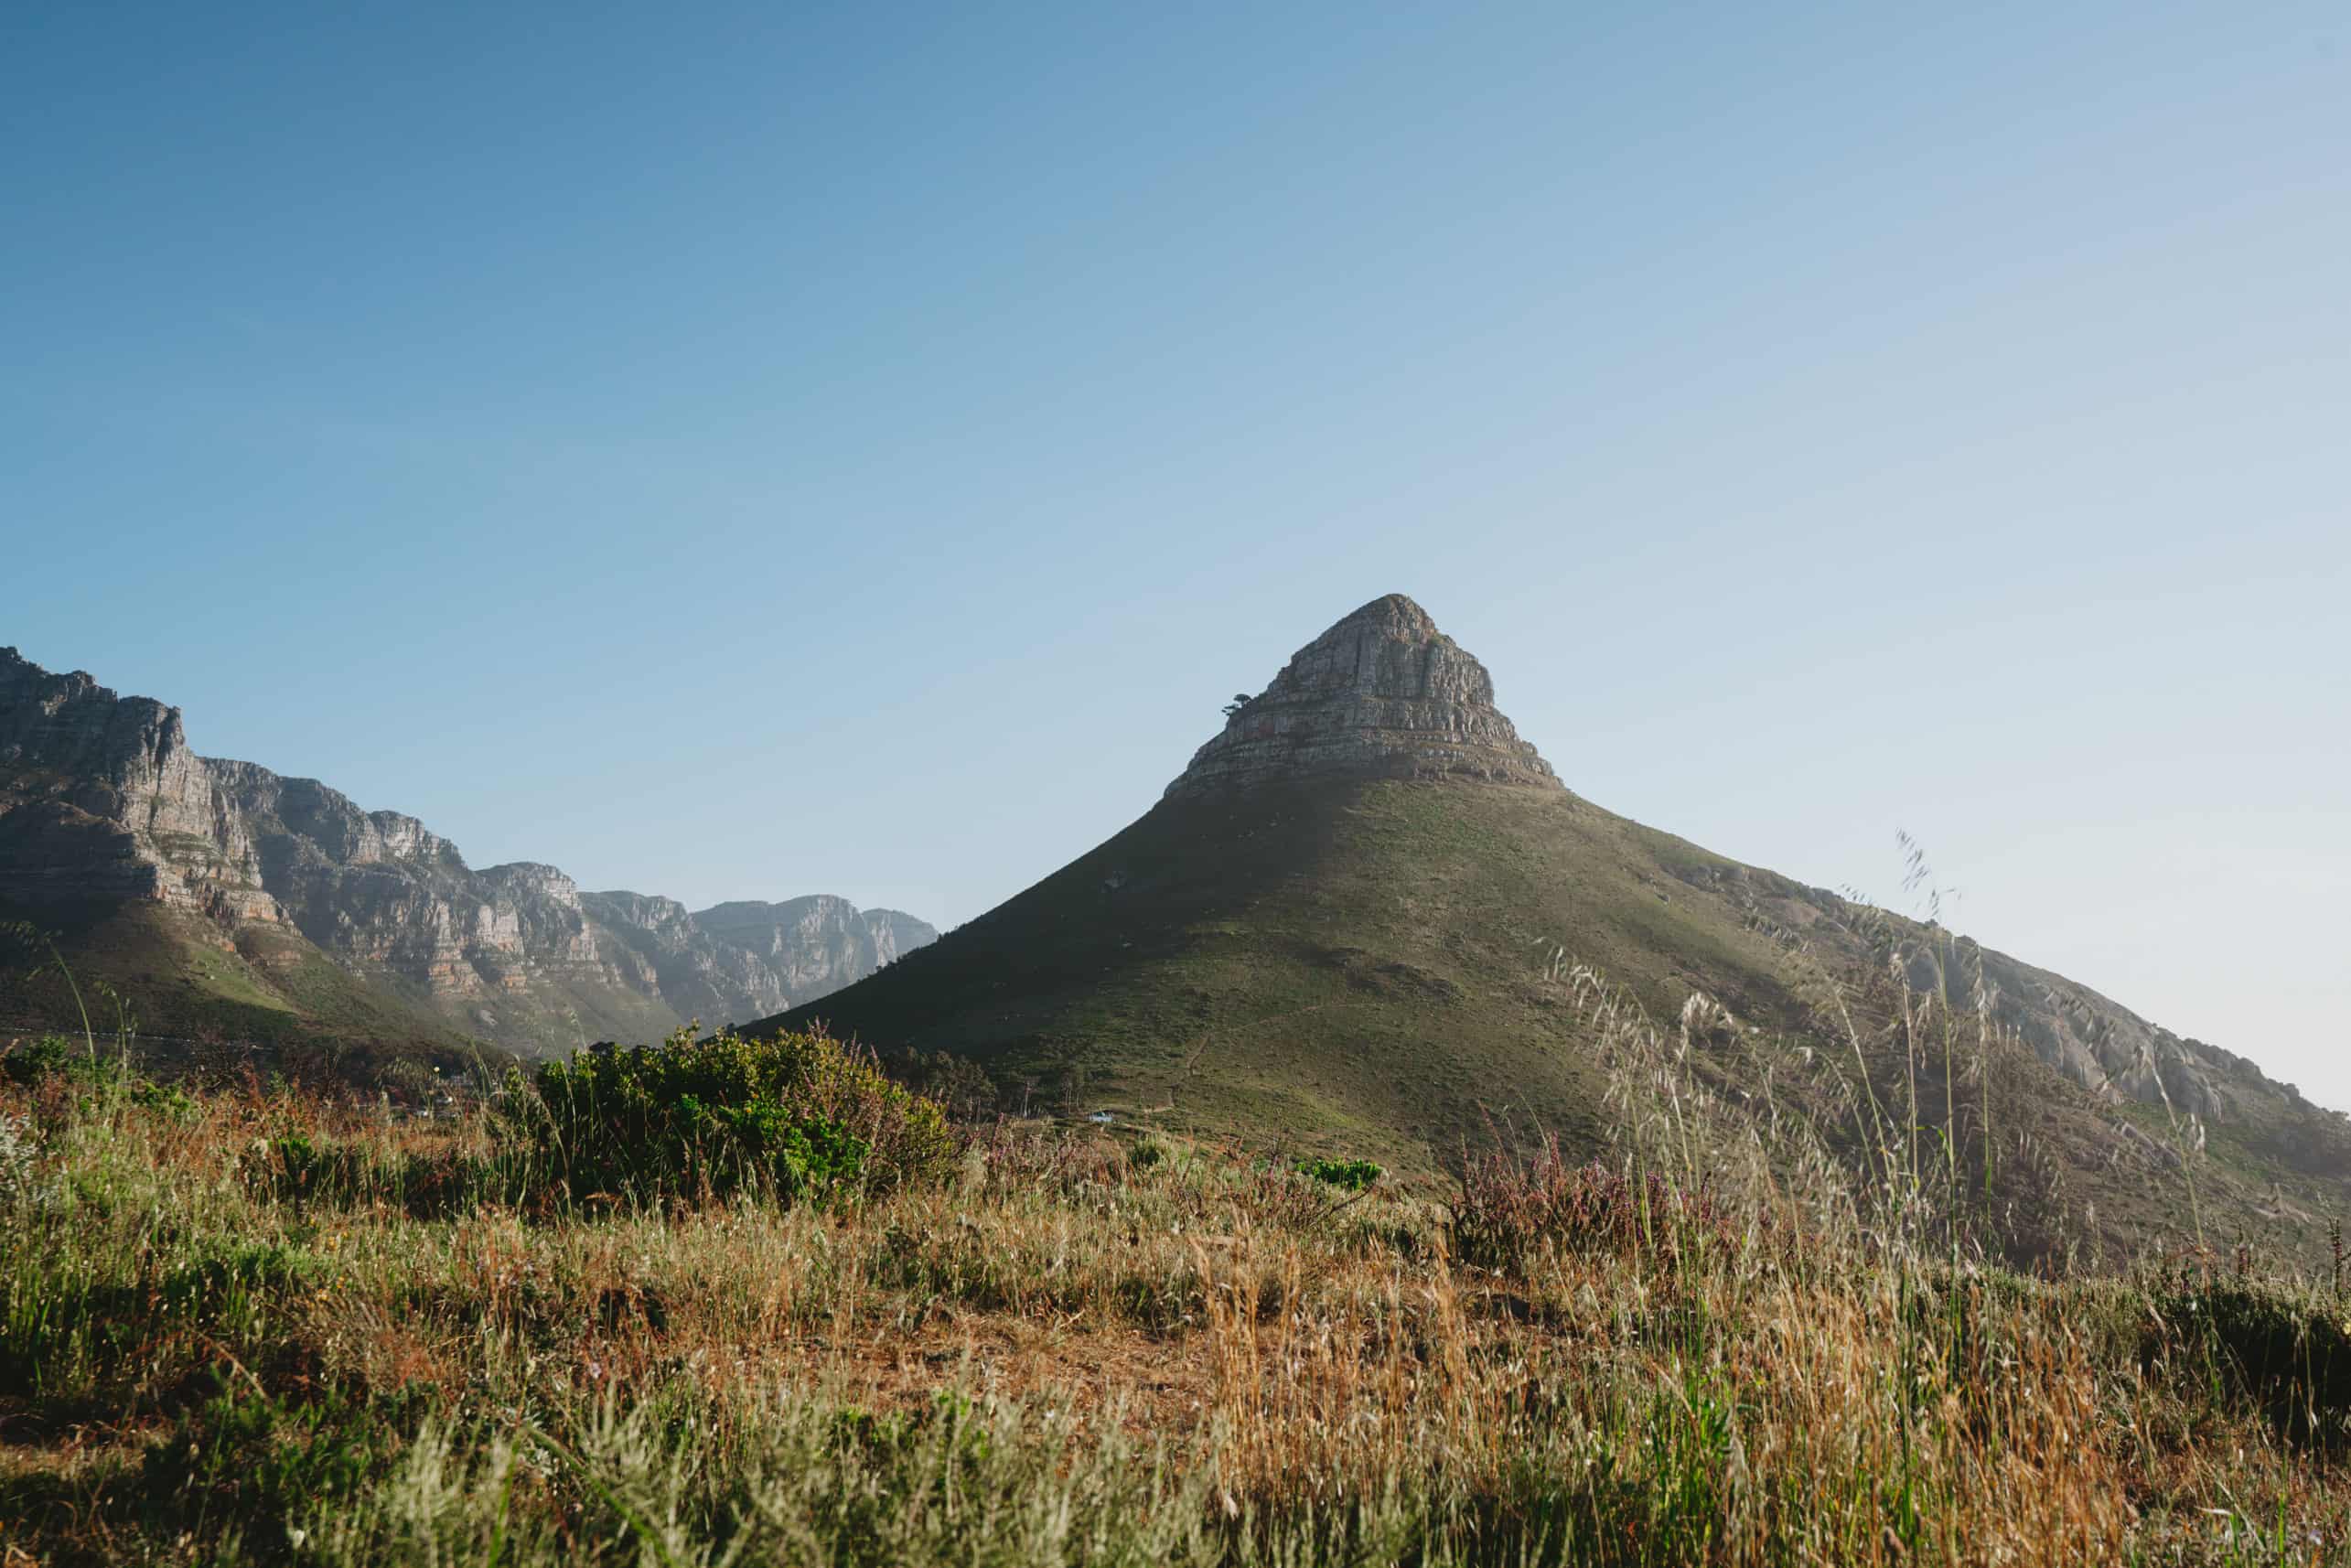 A scenic mountain range in Cape Town, South Africa, with lush grass and bushes in the background.